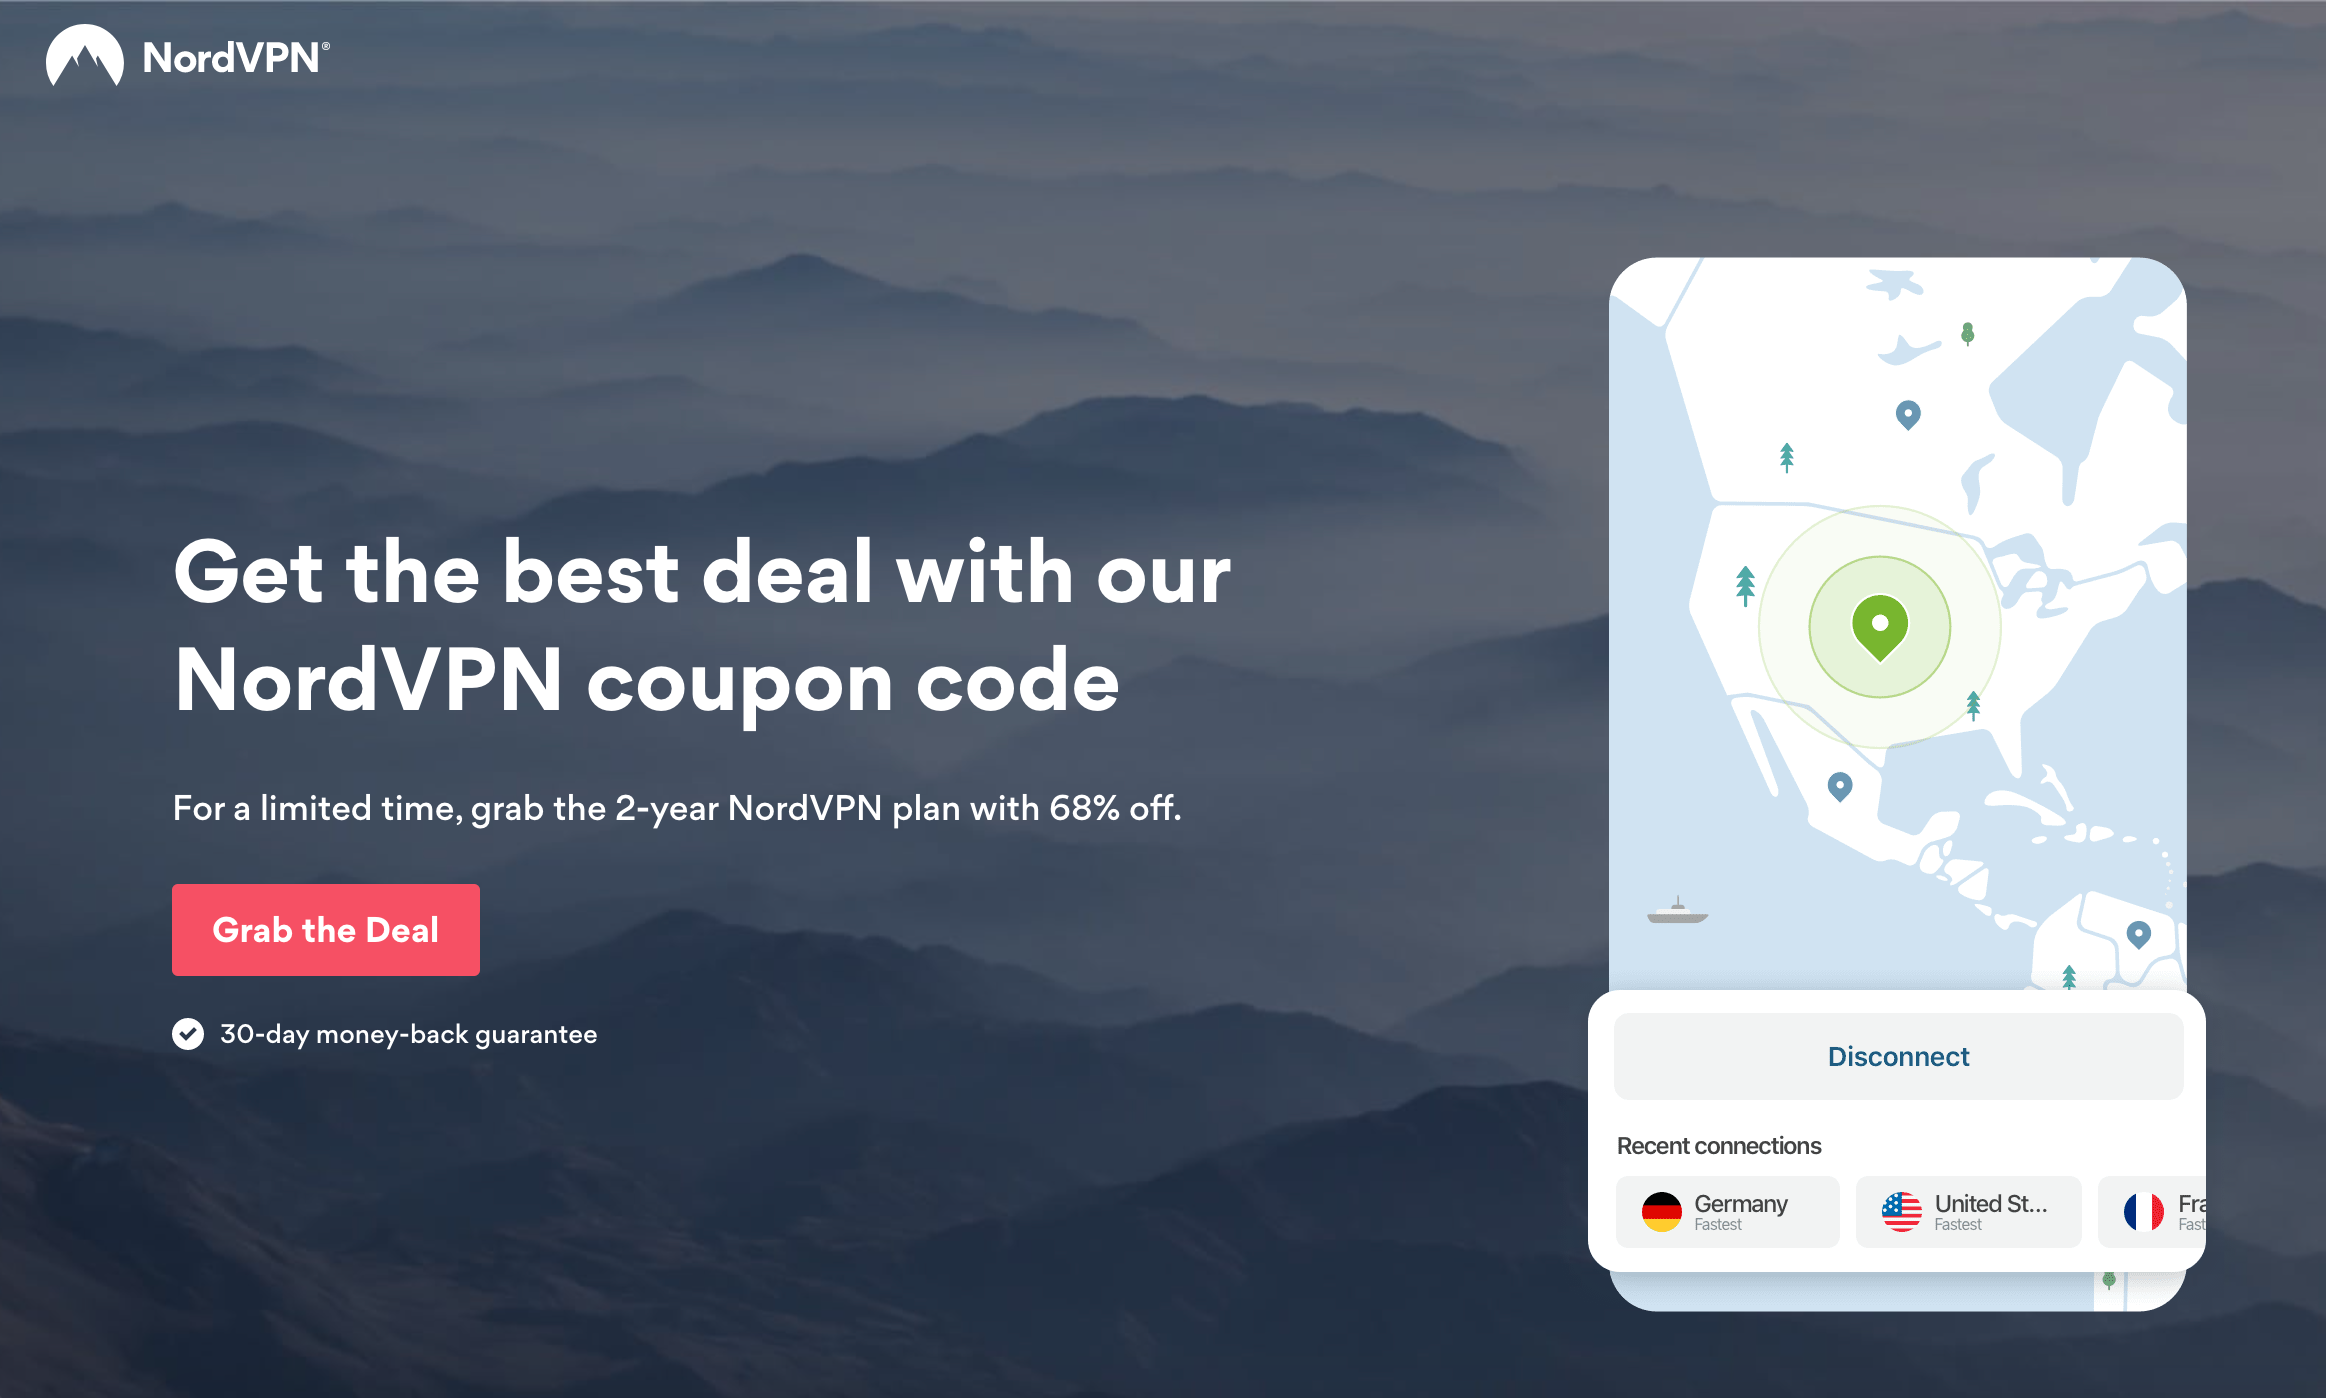 Get a NordVPN discount with Tipsfromgeeks and Alec Steele.